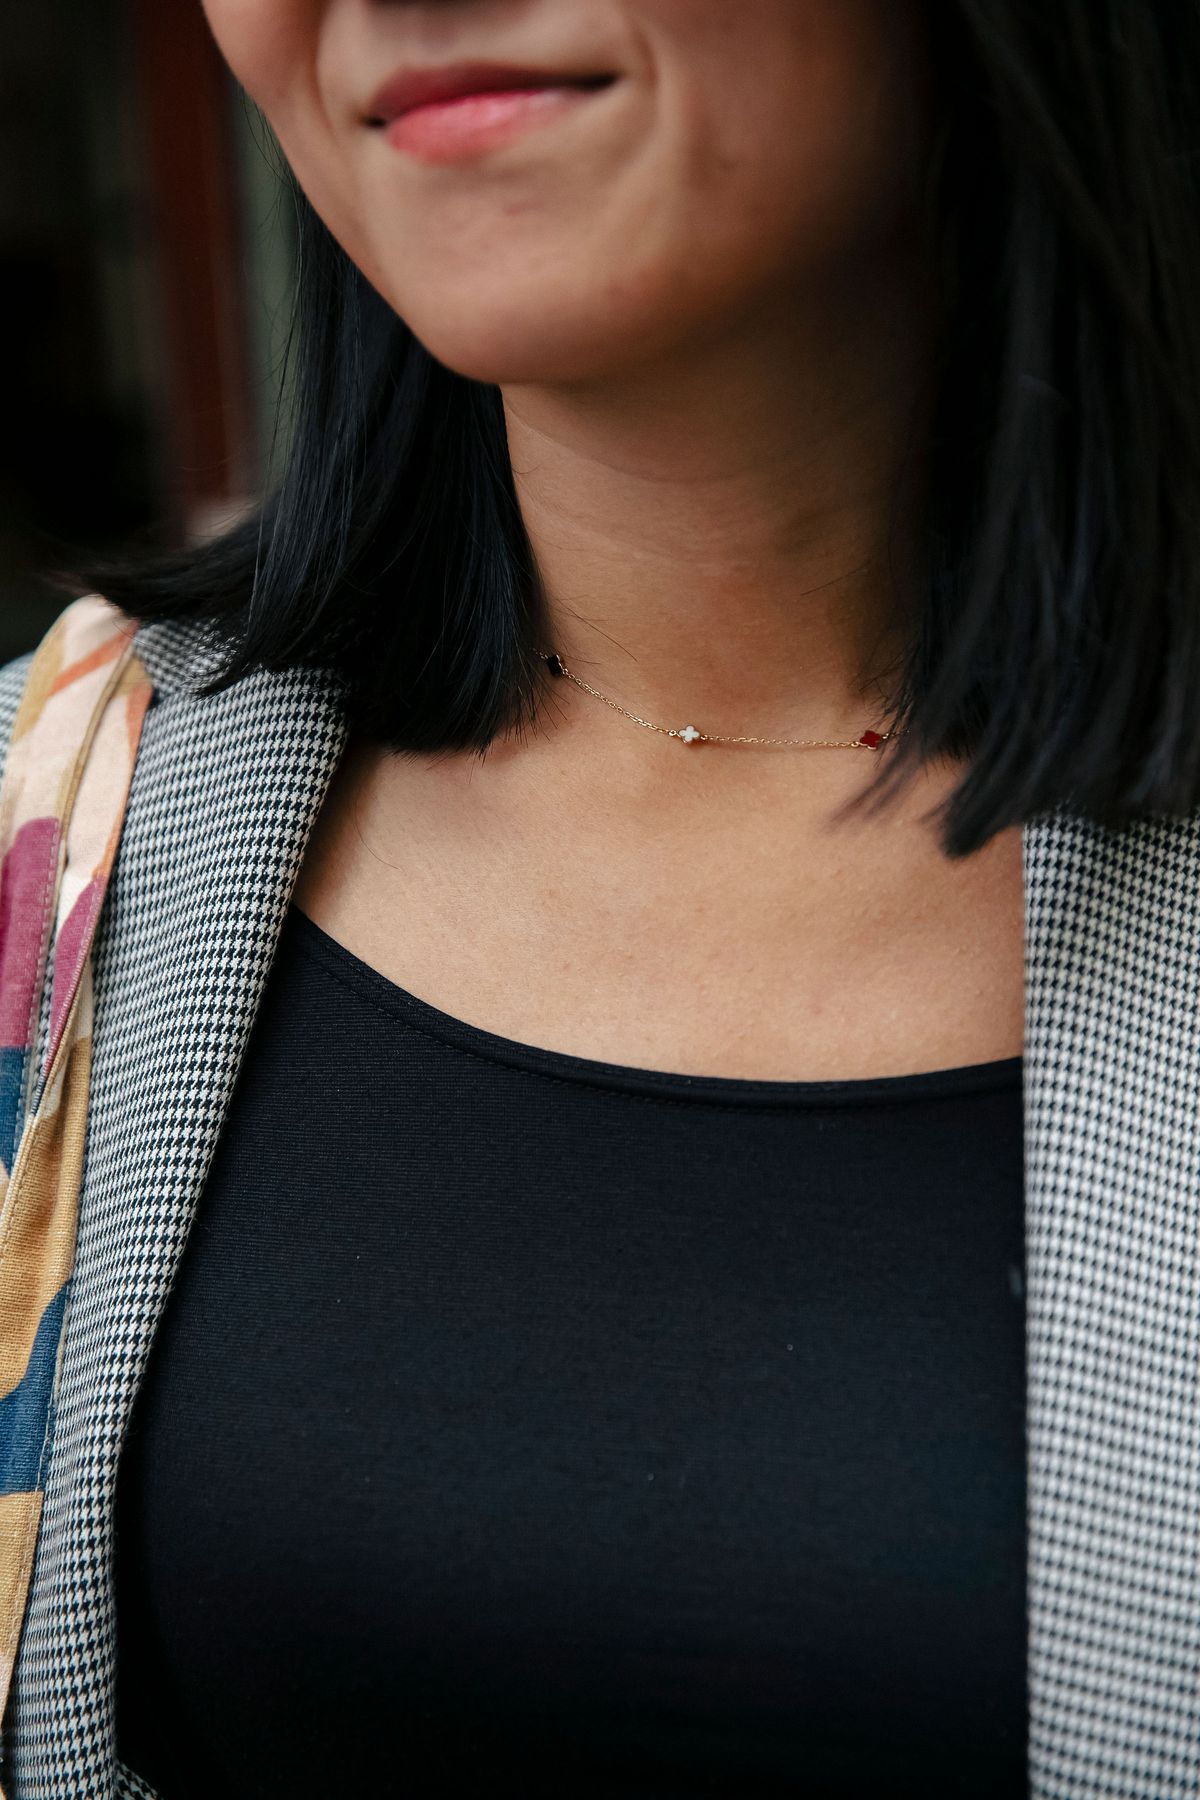 An upclose photo of a woman’s simple necklace.